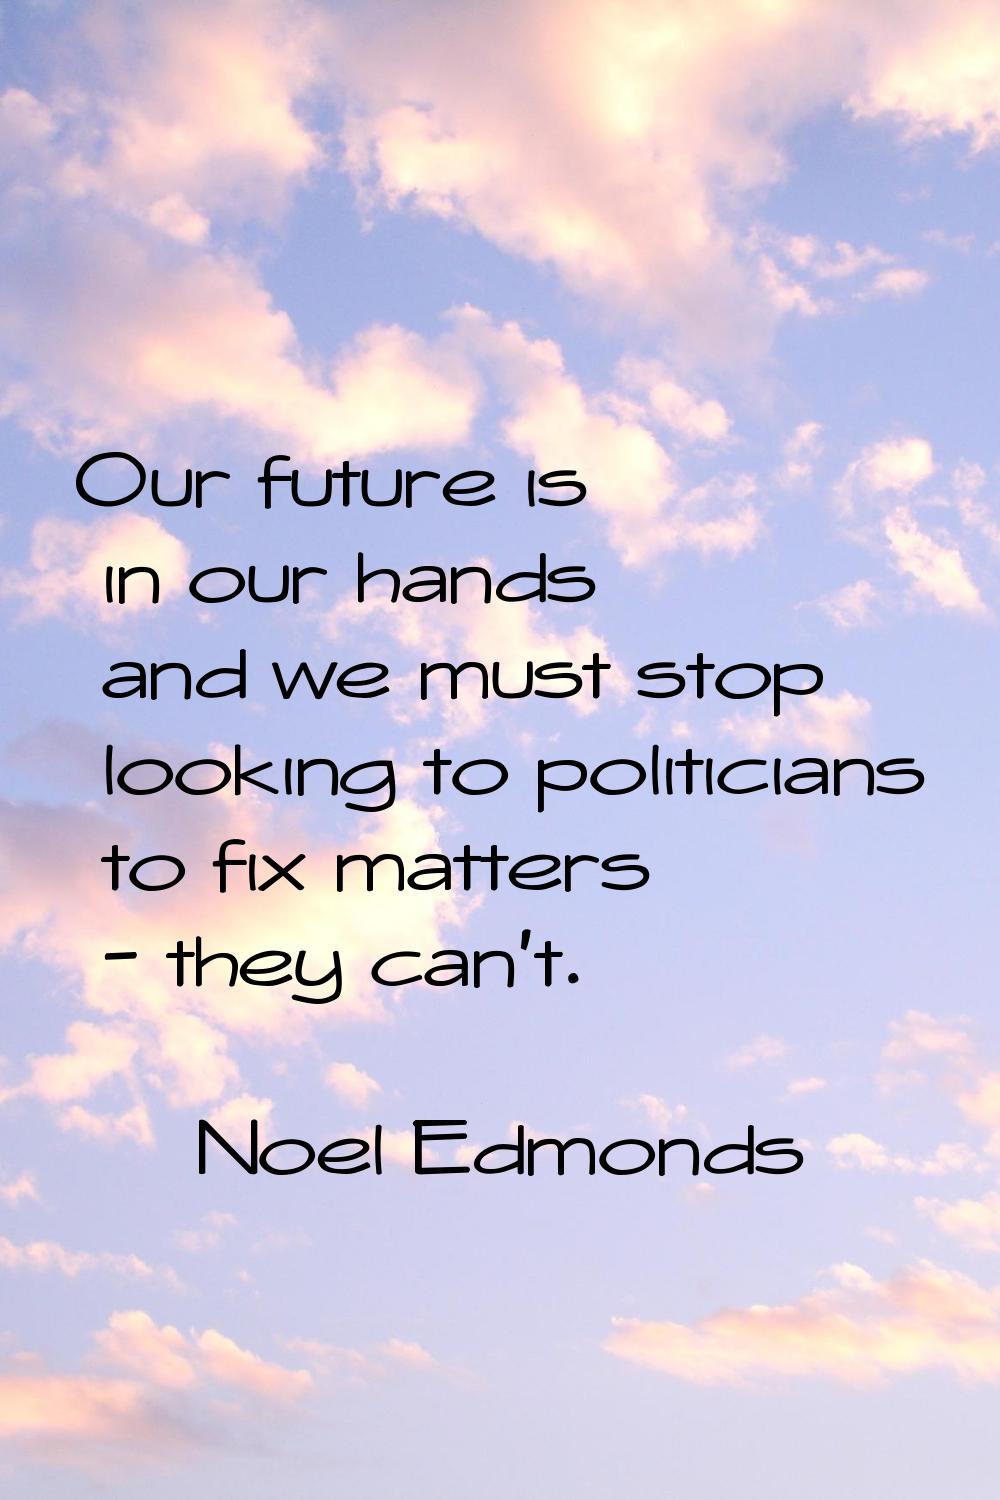 Our future is in our hands and we must stop looking to politicians to fix matters - they can't.